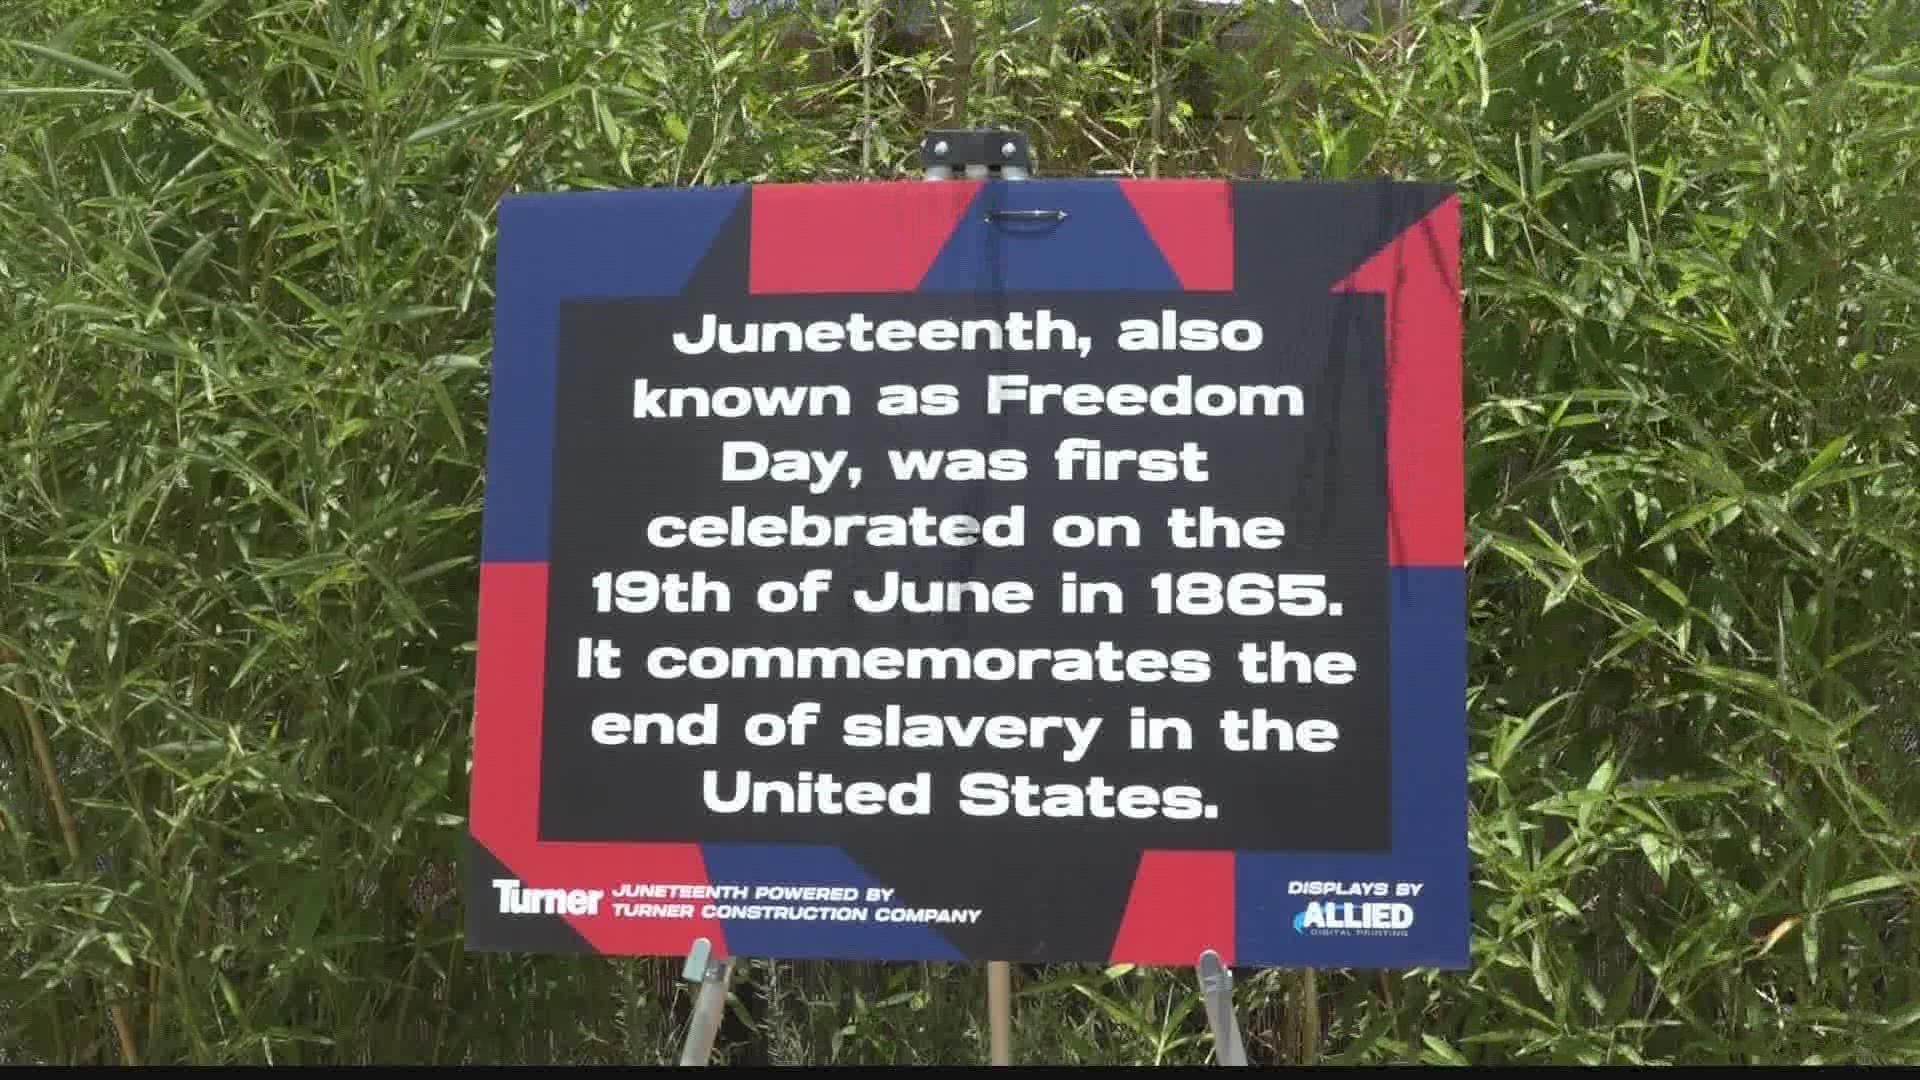 Juneteenth officially lands on June 19 every year and is a federal holiday that commemorates the end of slavery in the confederate states.